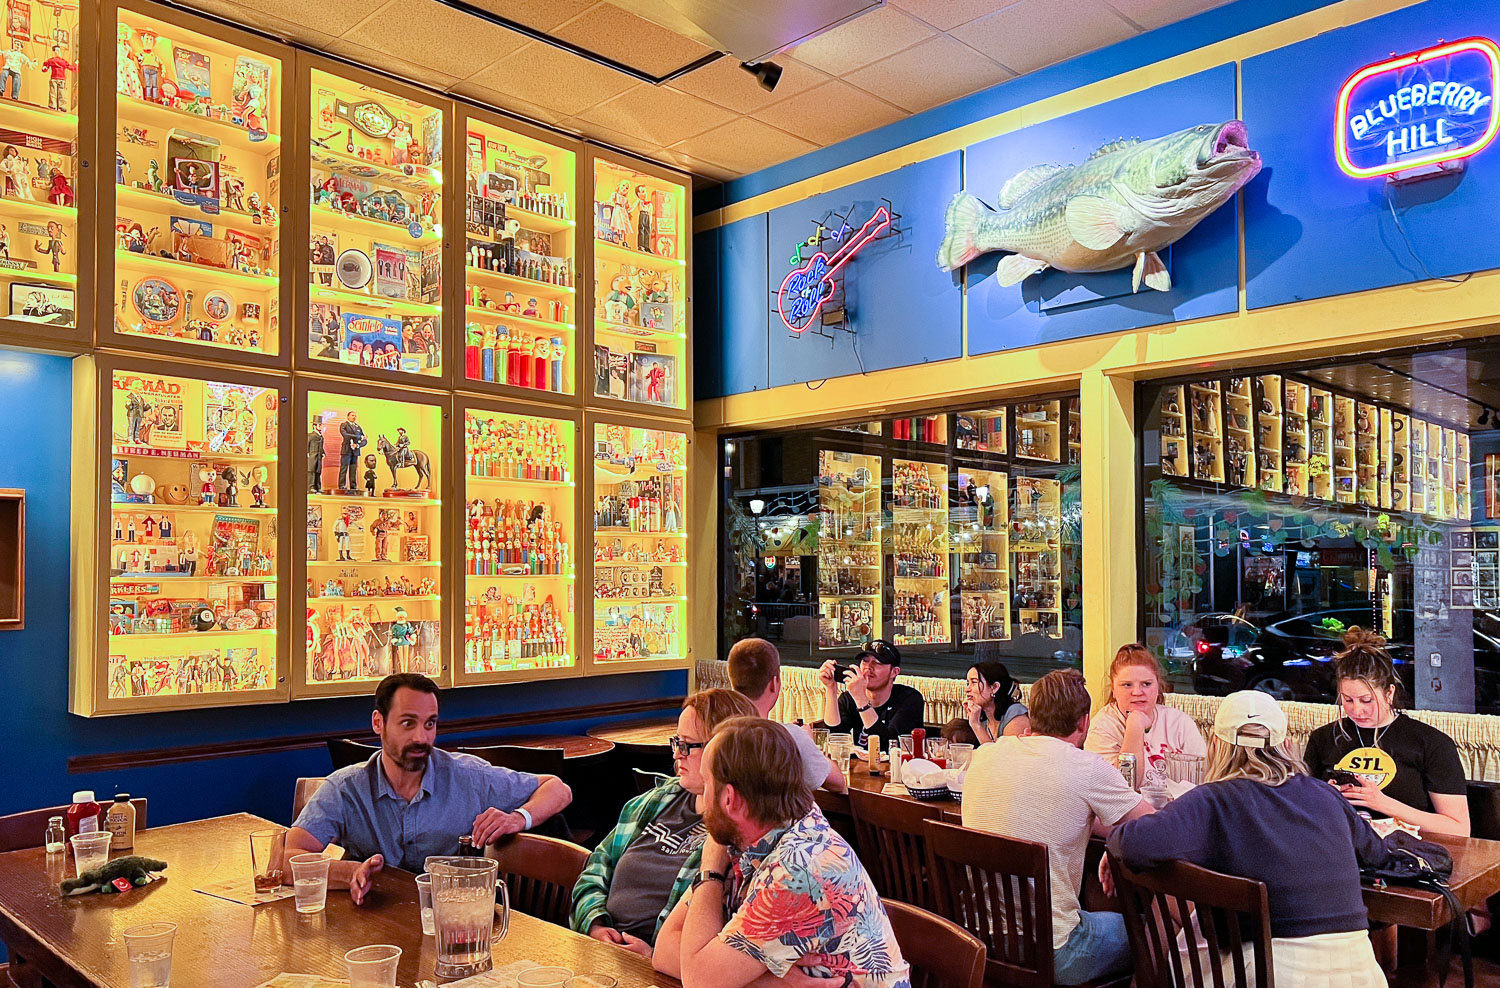 The Dart Room at Blueberry Hill. Two groups of people enjoy food and beer at two tables. There are neon signs and large colorful display cases of memorabilia around them.